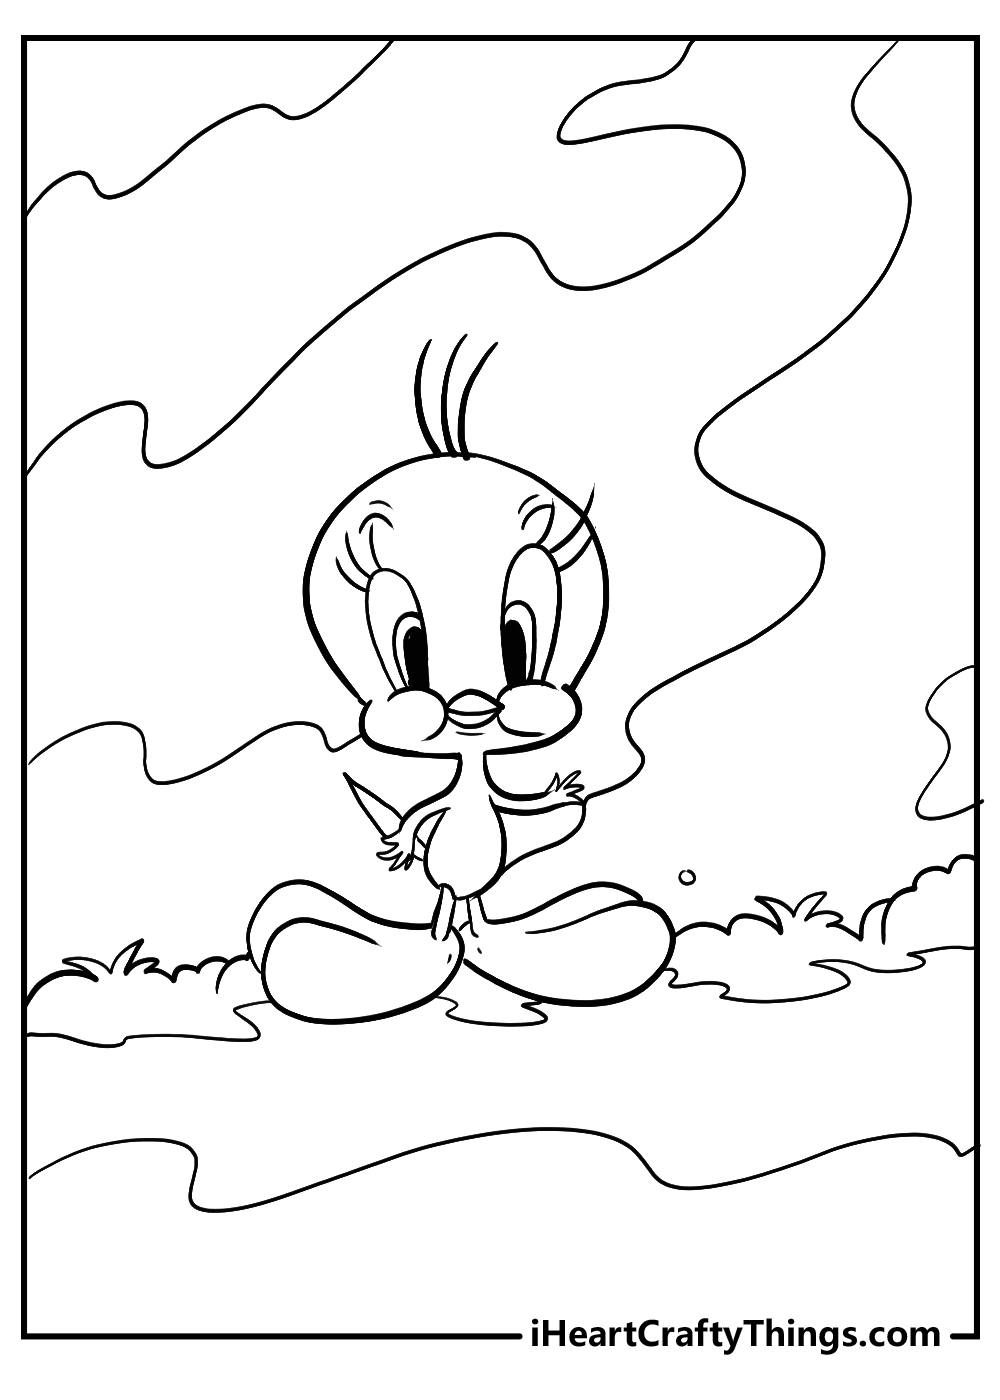 Tweety Bird coloring pages